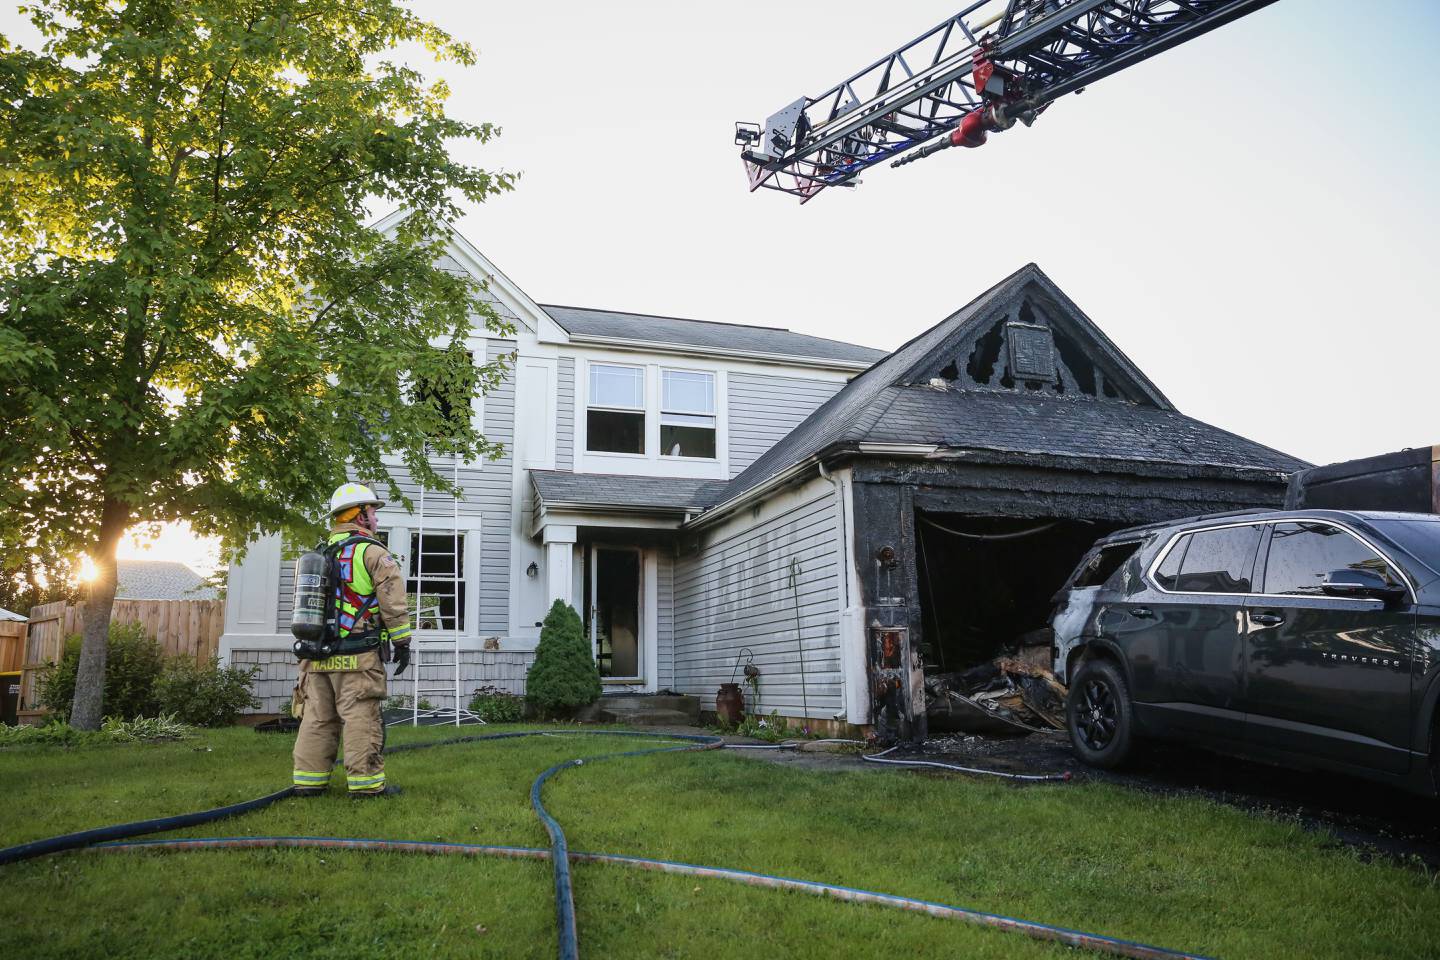 The Huntley Fire Protection District responded at 5:05 a.m. Friday, June 3, 2022, to the zero to 100 block of Raxburg Court where crews found a two-story home with smoke showing from the front of the building, according to a news release.